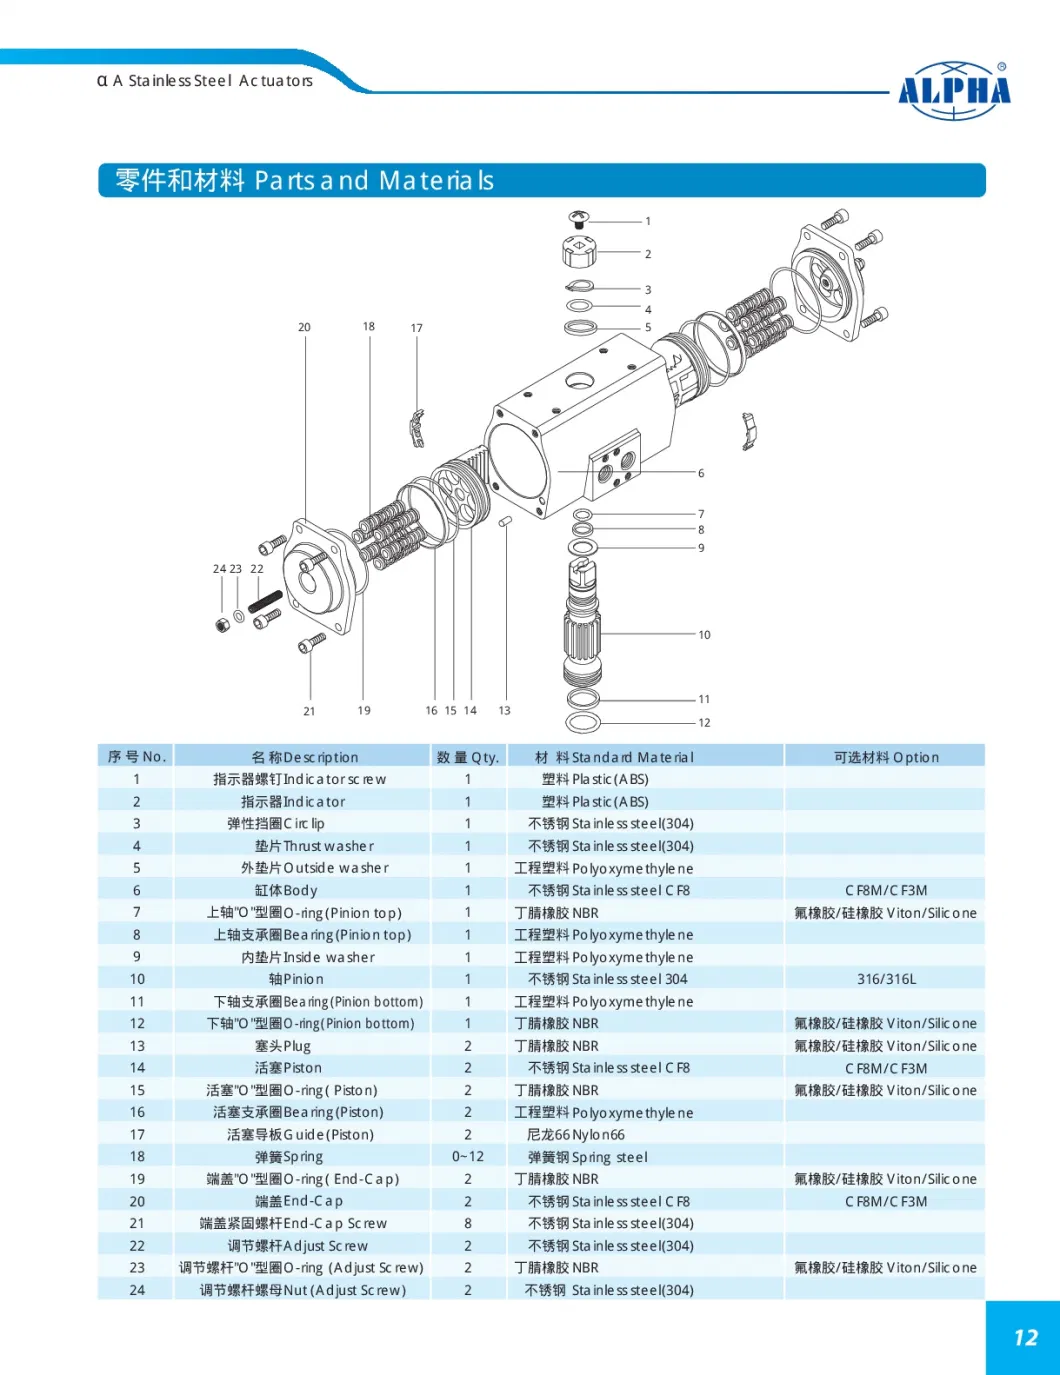 Famous Products Stainless Steel Alpha Series a Rt02700 Pneumatic for Ball Valve Actuator